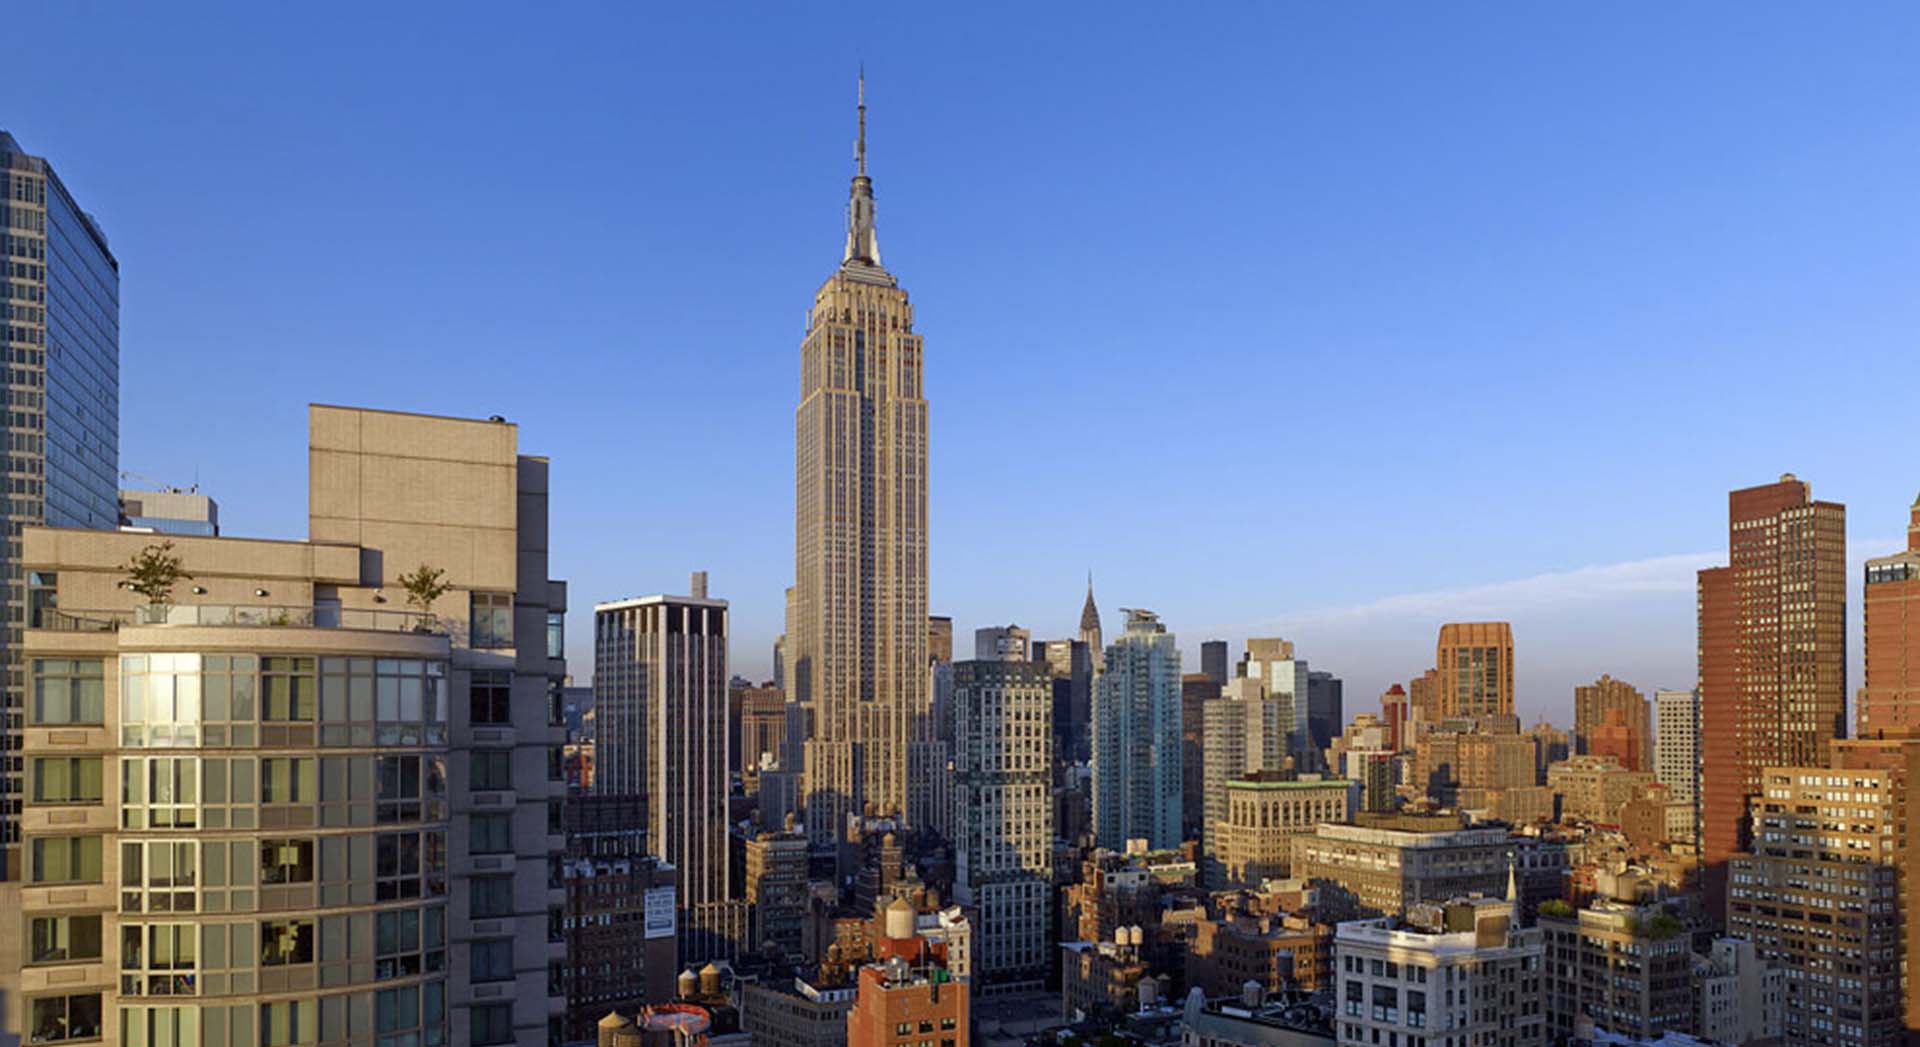 rooftop view of manhattan looking uptown during the day with clear skies and empire state building